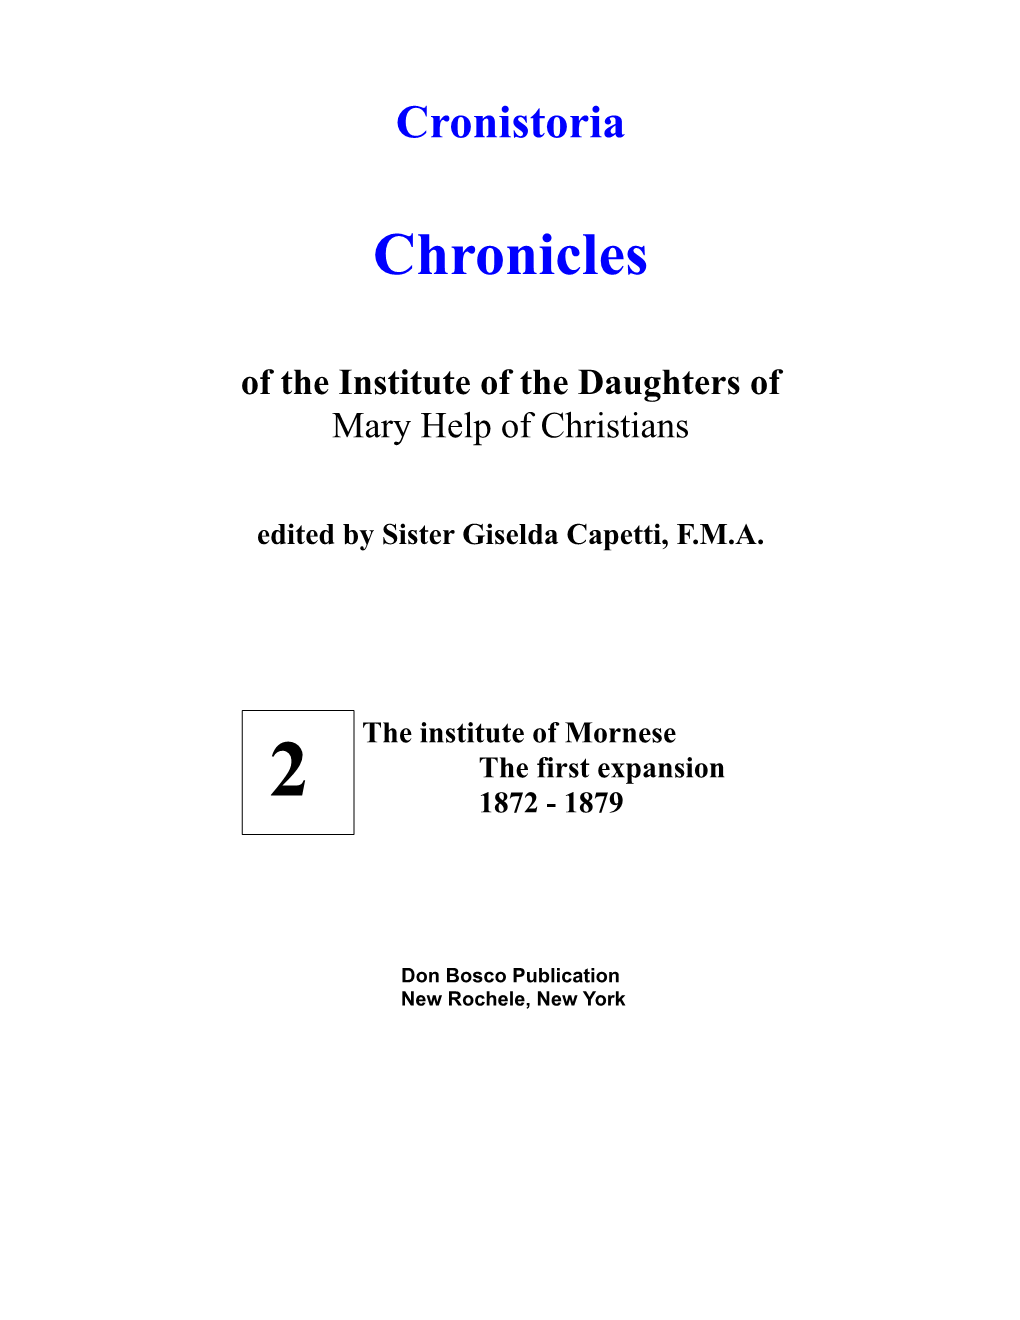 Chronicles of the Institute of the Daughters of Mary Help of Christians